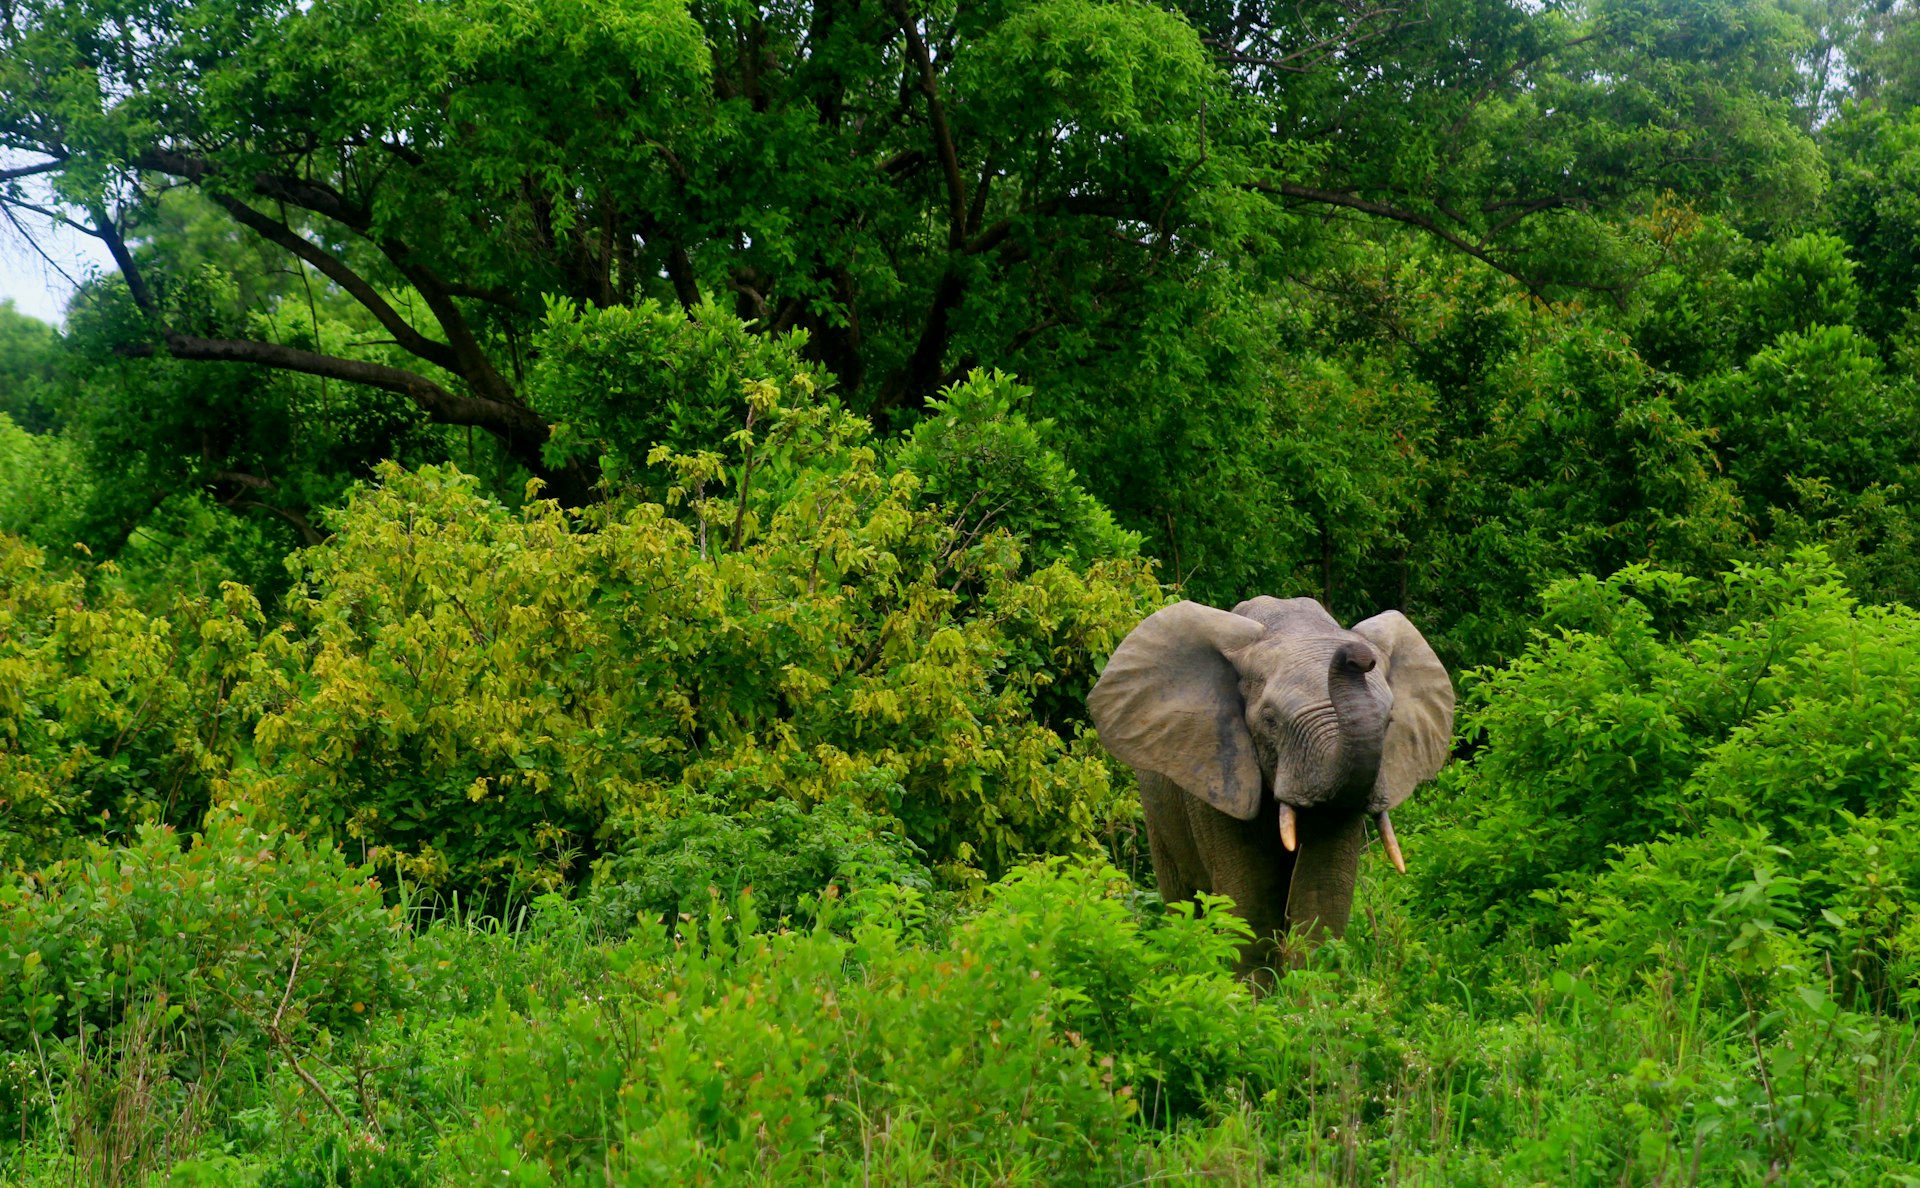 A male African elephant in the greenery of Mole National Park, Ghana, West Africa